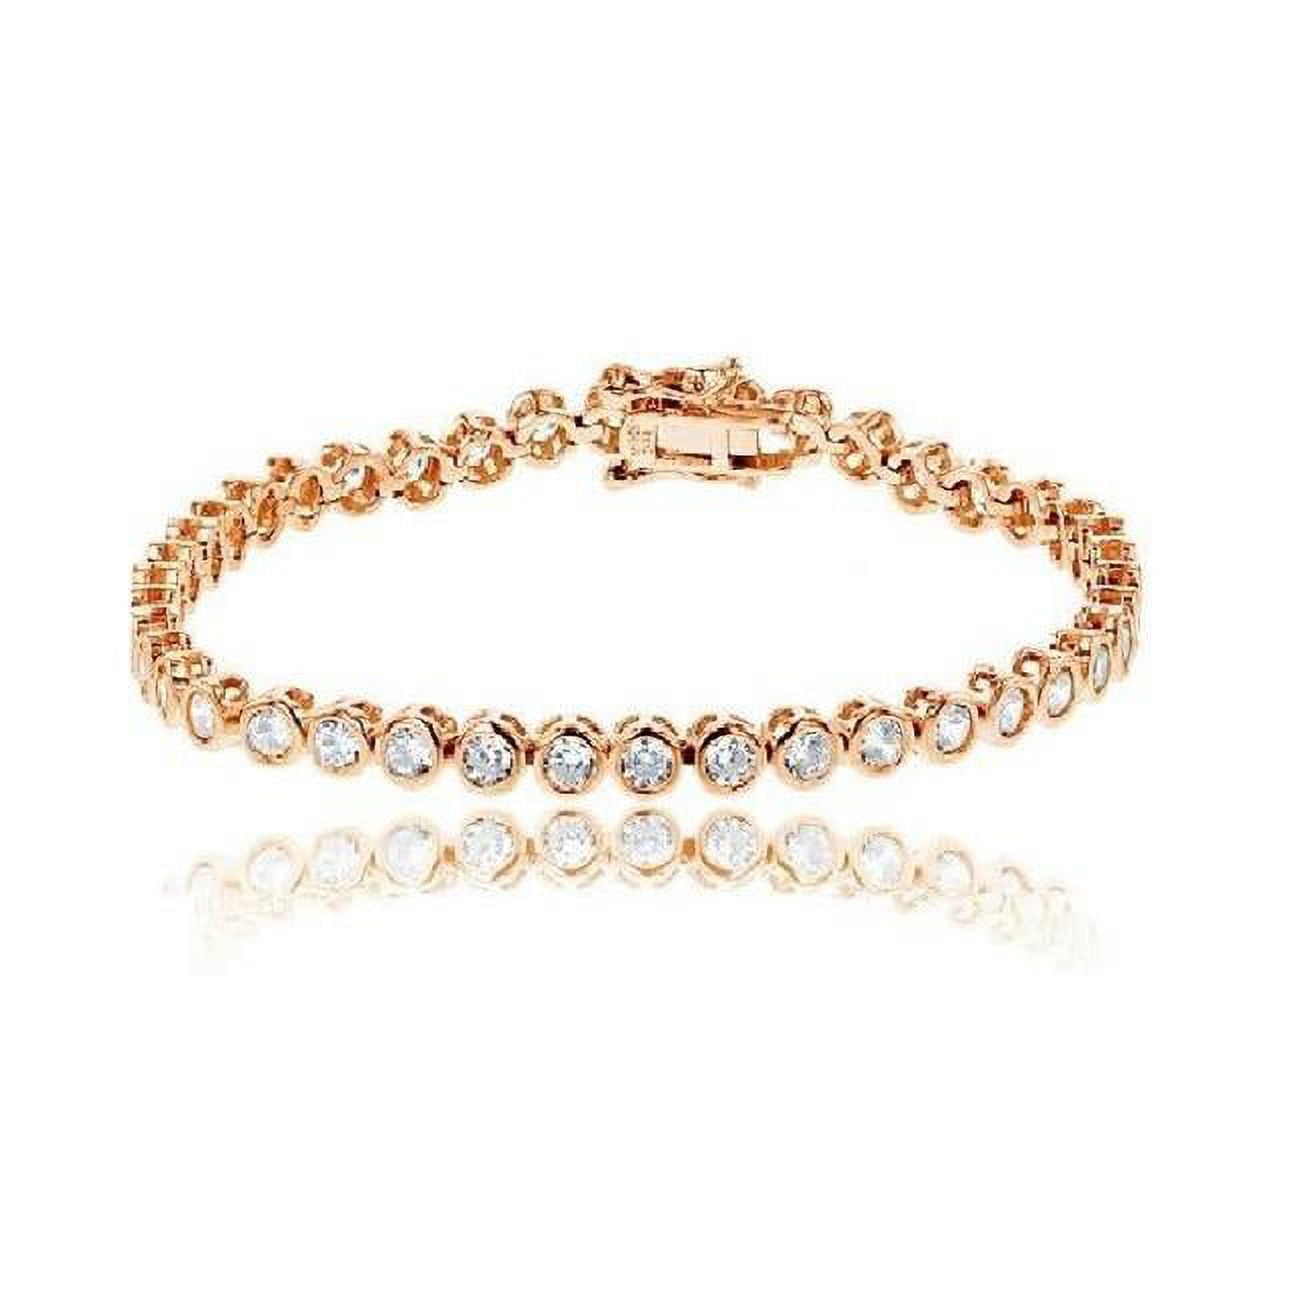 Picture of 212 Main 02-006Y-DSB 7.25 in. 14K Gold Over Silver Bezel-Set Round-Cut Cubic Zirconia Tennis Bracelet